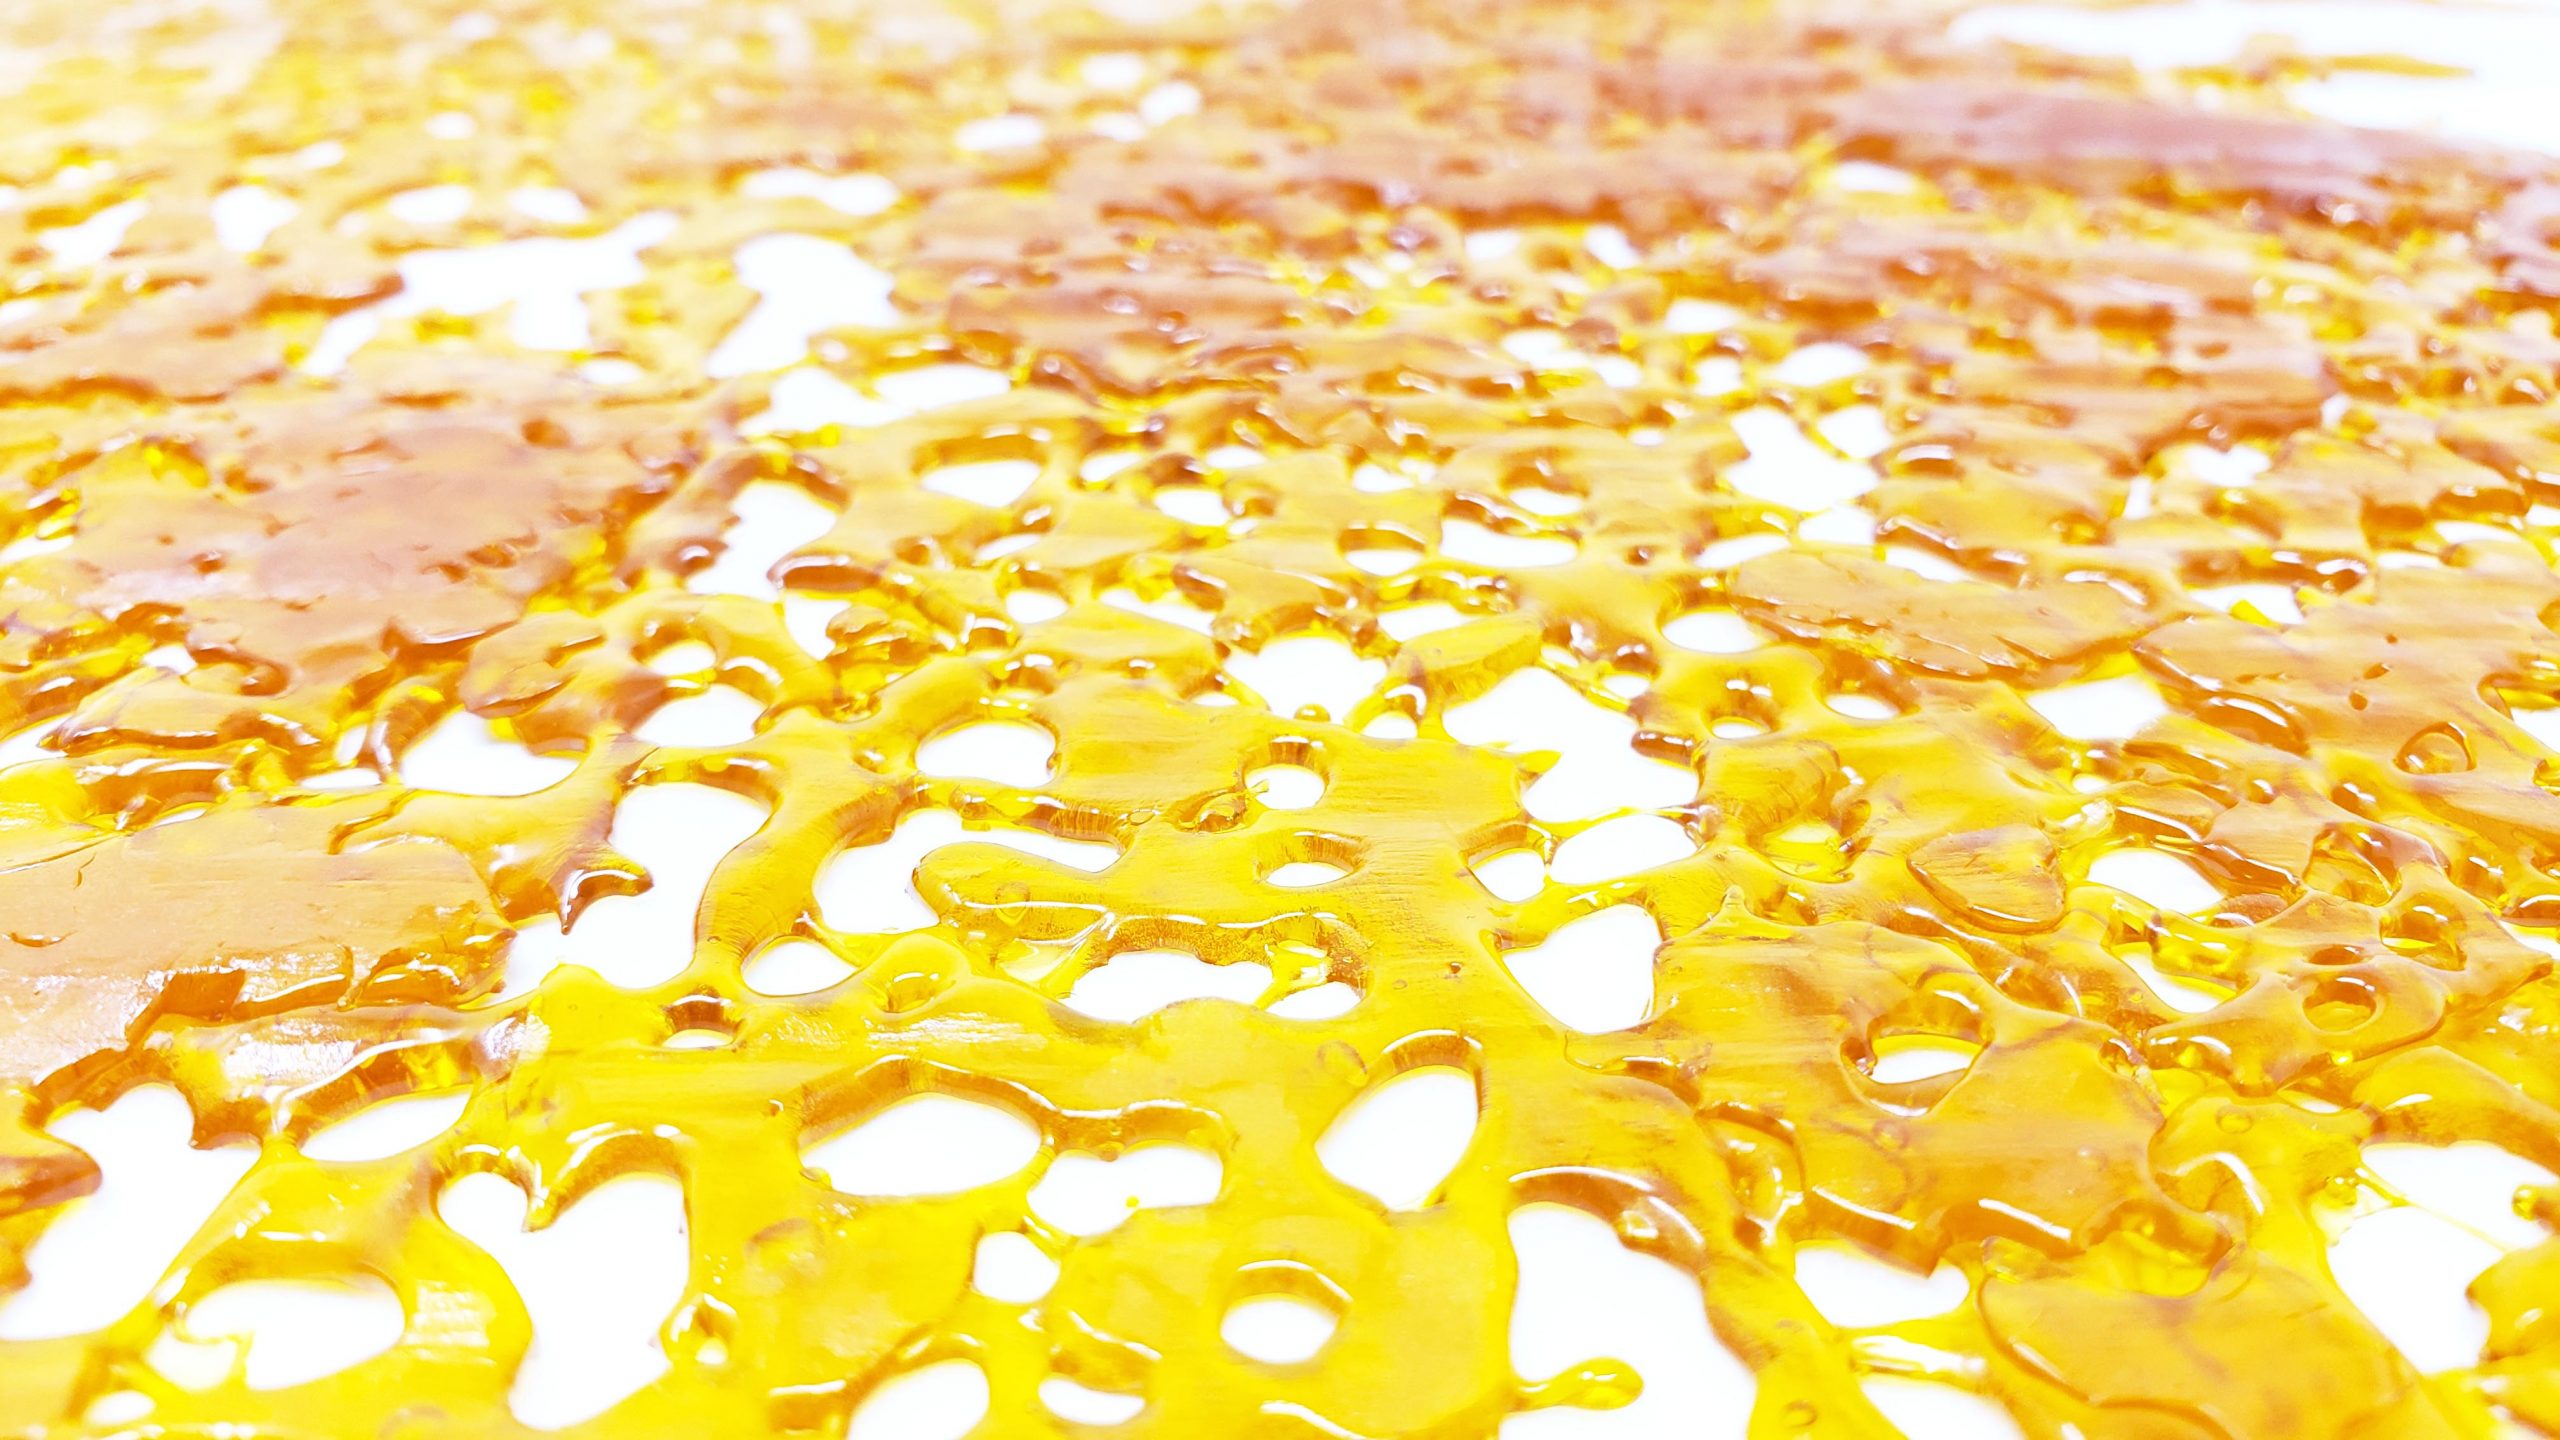 Where To Buy Cheap Shatter Online In Canada - Best 3 Picks